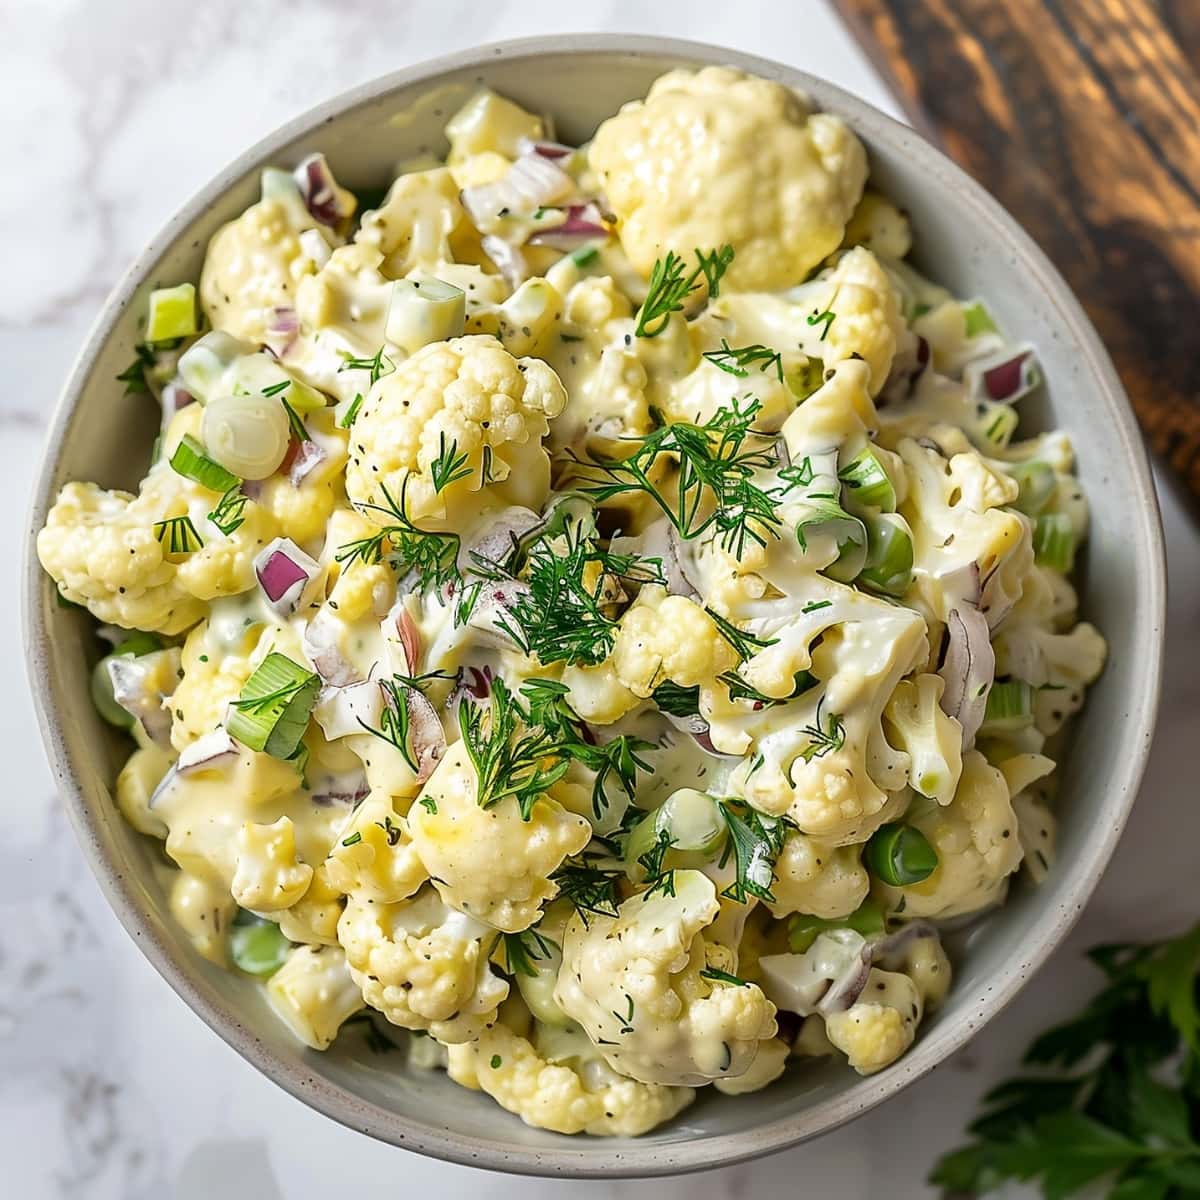 Top view shot of cauliflower potato salad with red onions, celery, and dill